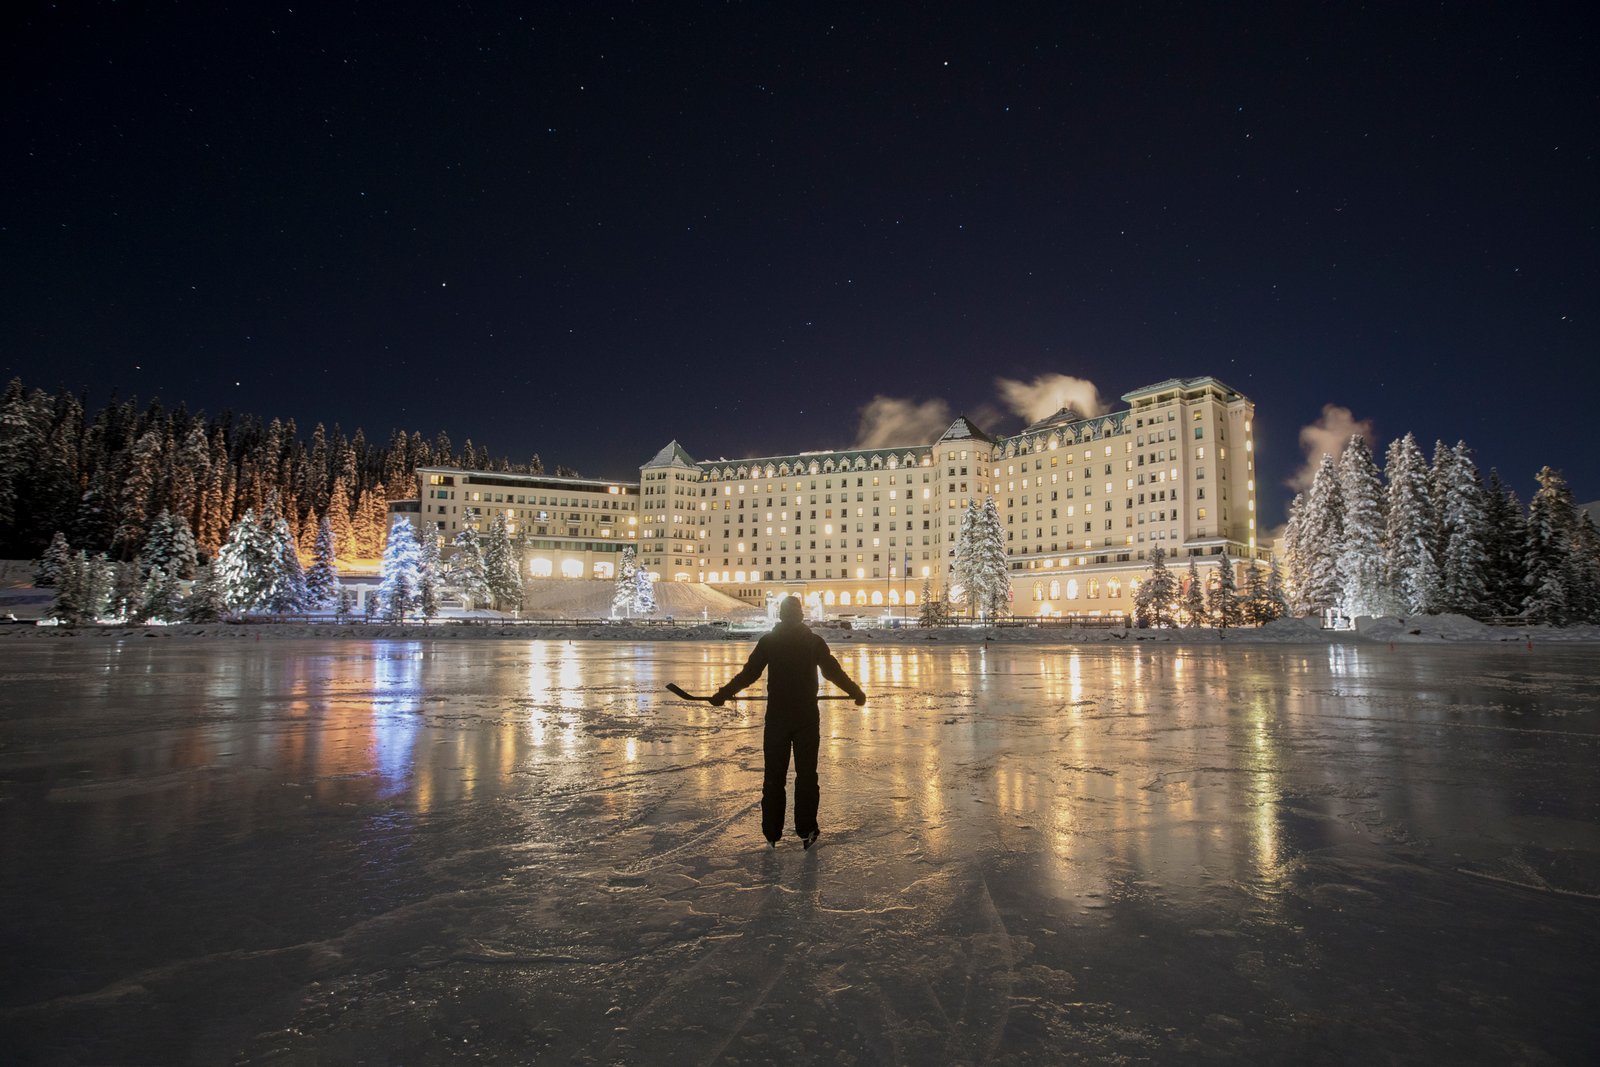 A lone ice skater skating and holding a hockey stick on a frozen lake at night with a lit hotel in the distance.